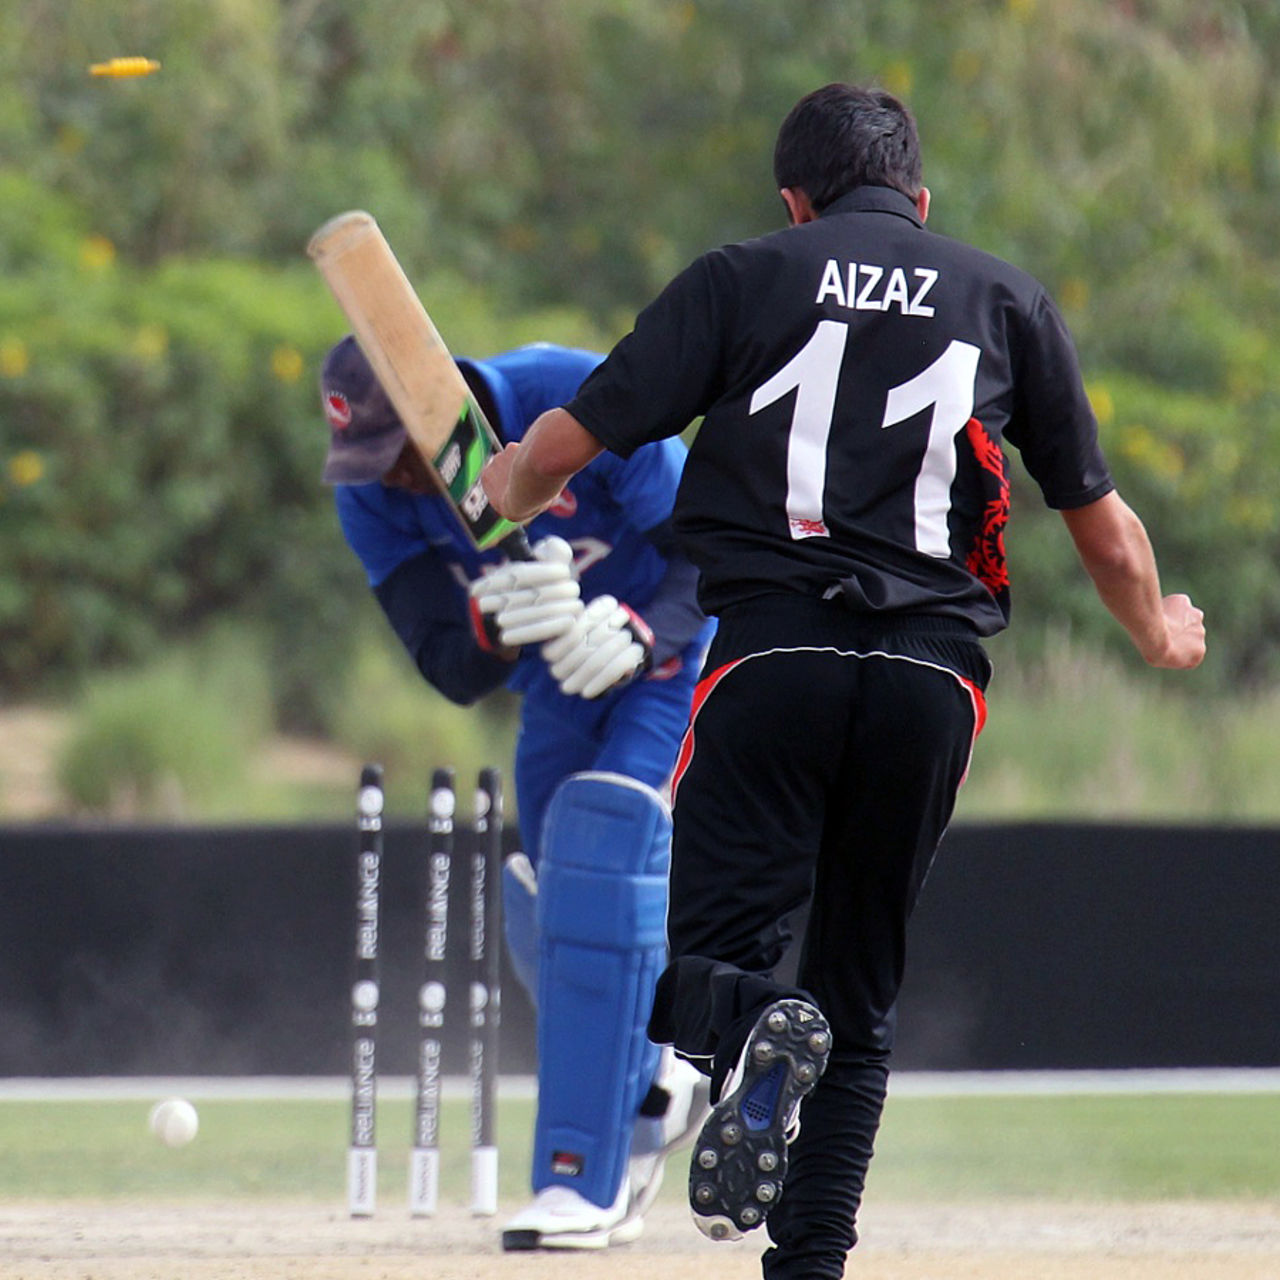 Aizaz Khan's brilliant spell of 5-25 included the wicket of Elmore Hutchinson during the ICC World Twenty20 Qualifier 11th Place Play-off match between Hong Kong and USA played at the ICC Global Cricket Academy ground in Dubai on 23rd March 2012